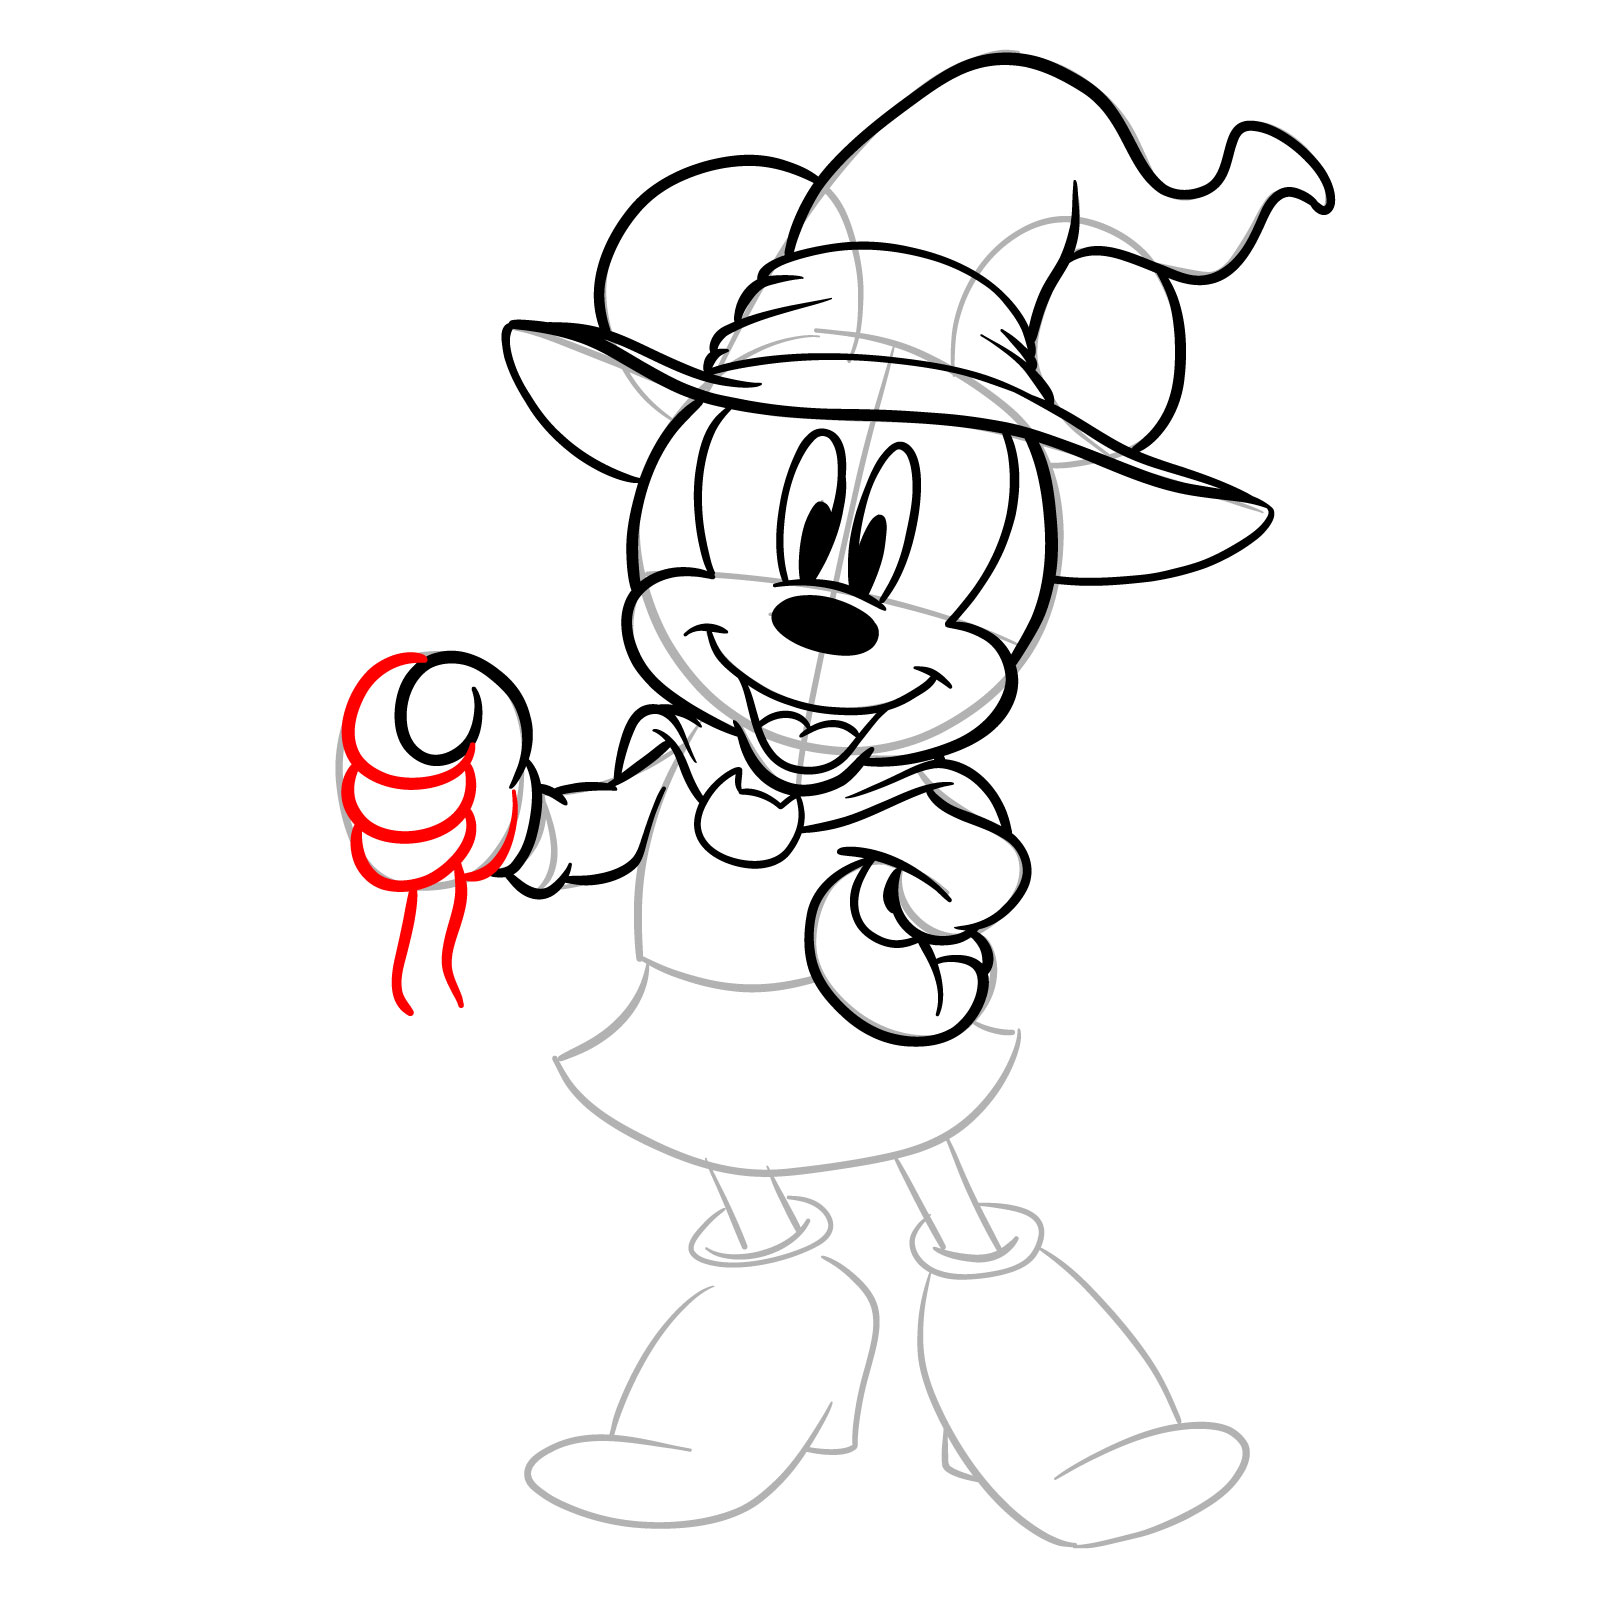 How to draw Halloween Minnie Mouse as a witch - step 20